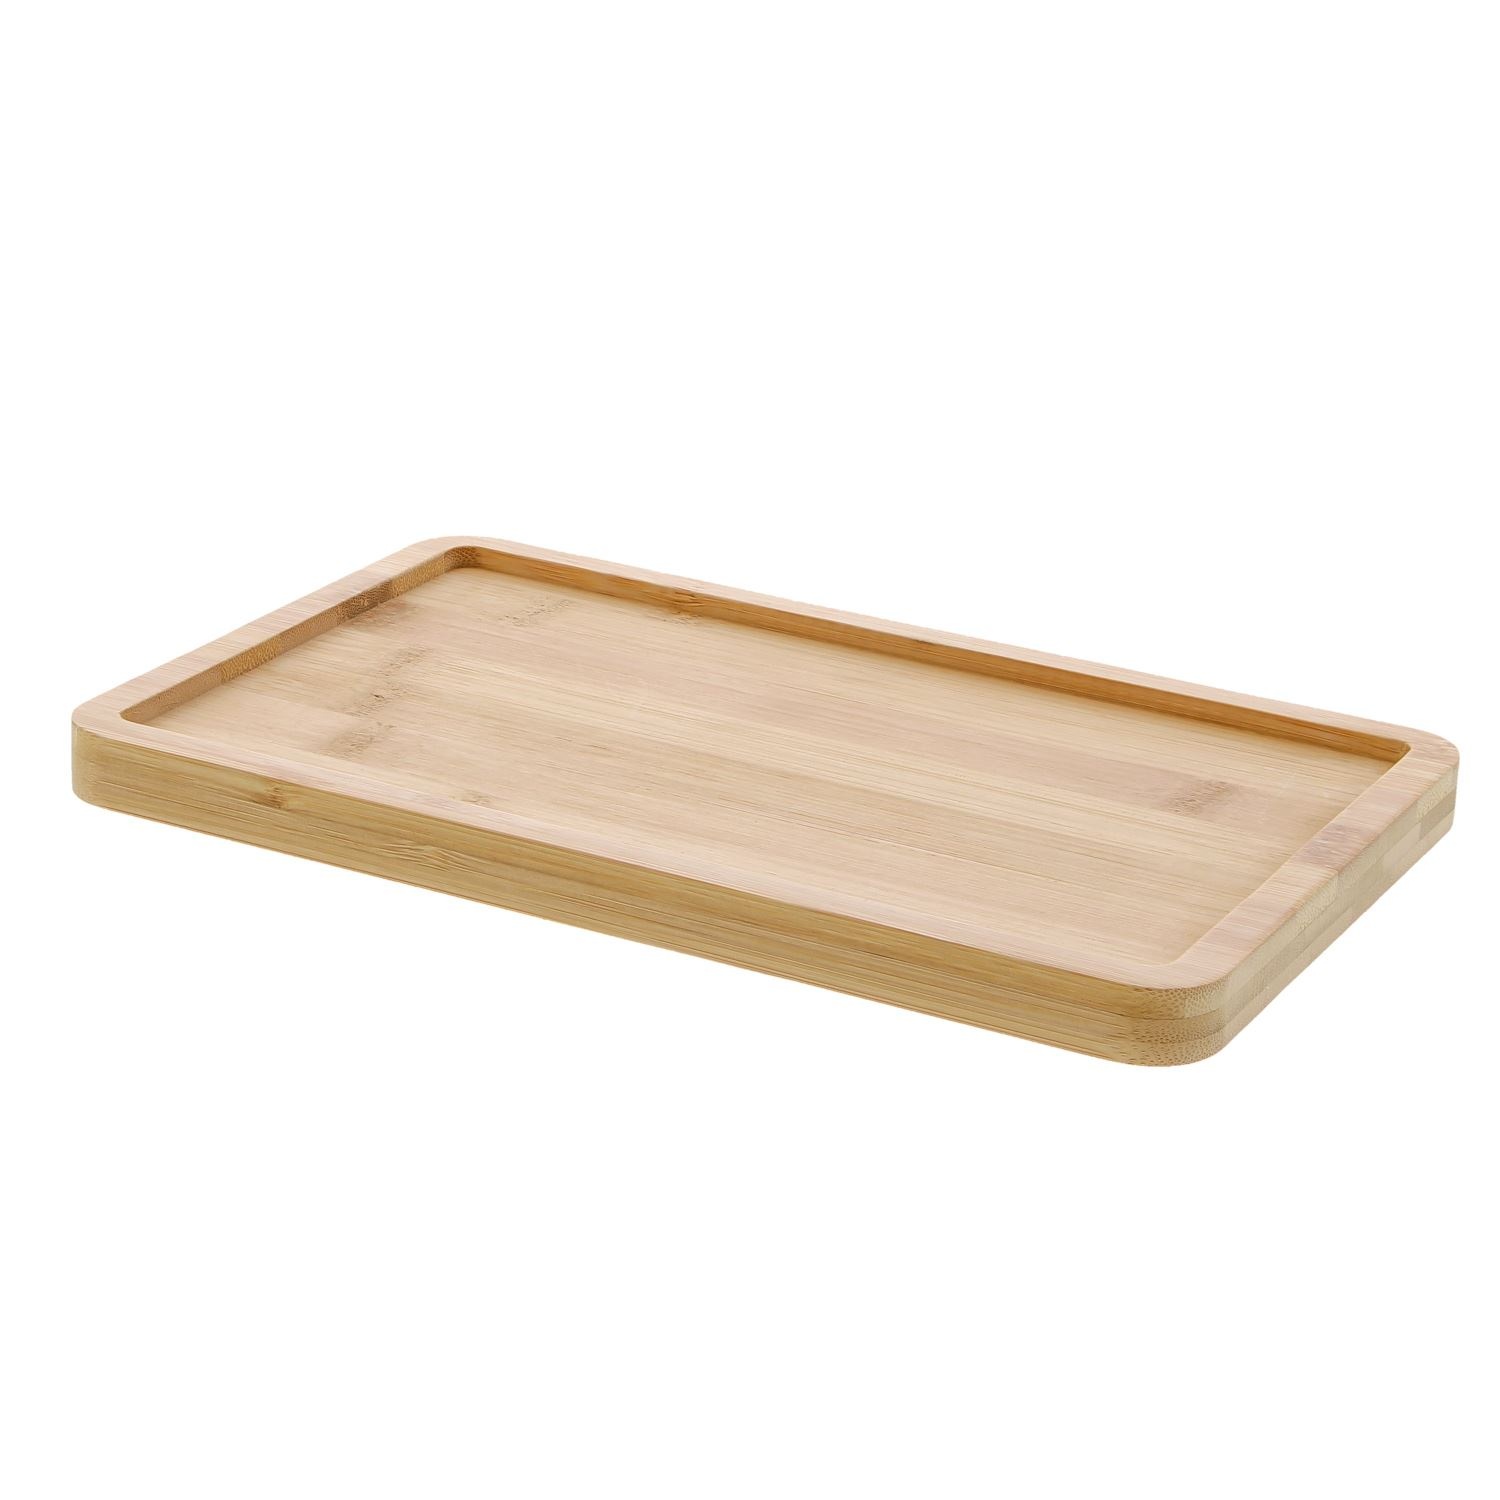 Rectangular tray in bamboo - 240*150*15mm - 12 pieces